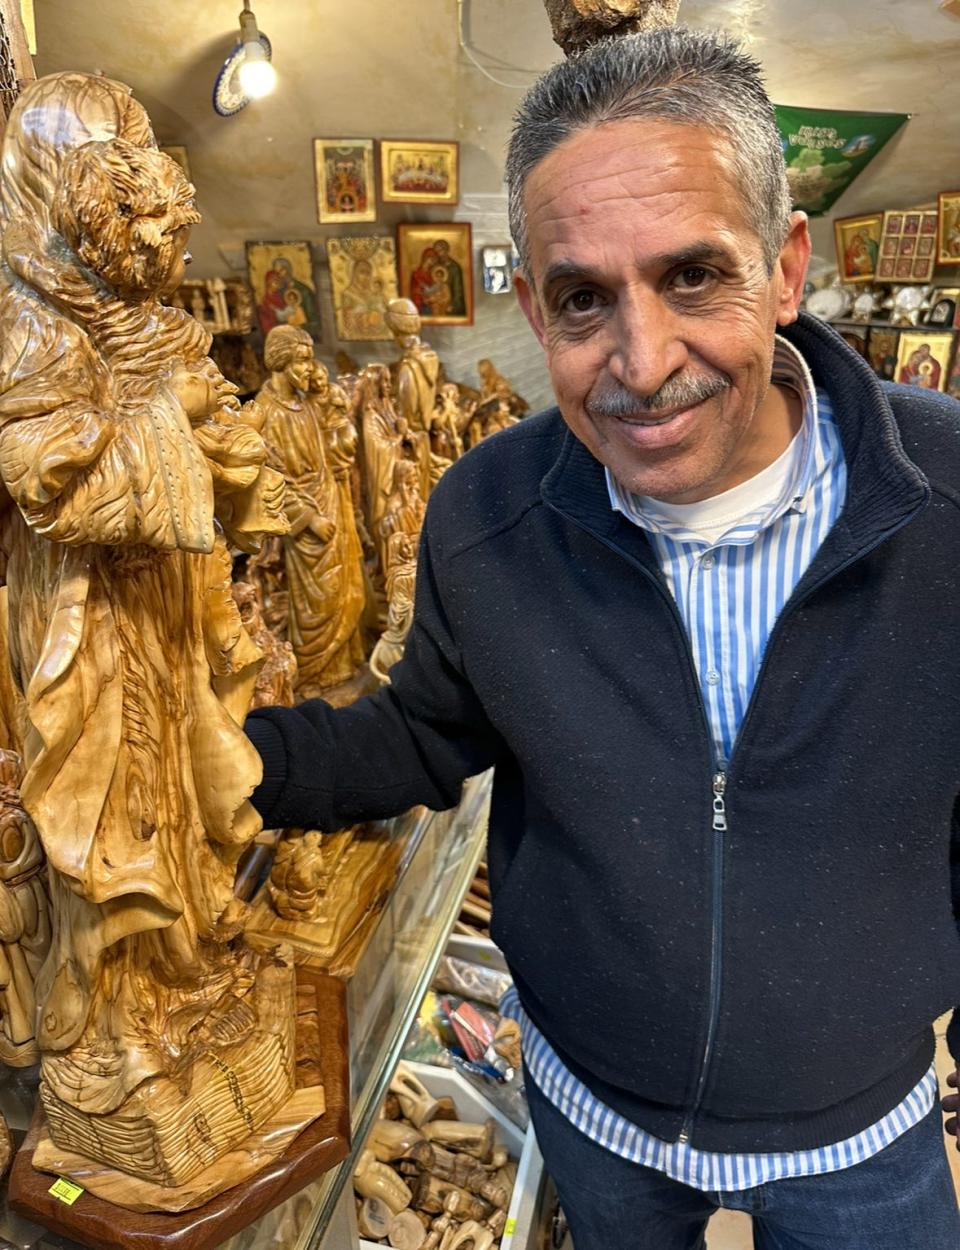 Kal Yousef, who runs an antiquities store in the shadow of Bethlehem's Church of the Nativity, says the days since Oct. 7 have been the hardest of his life.